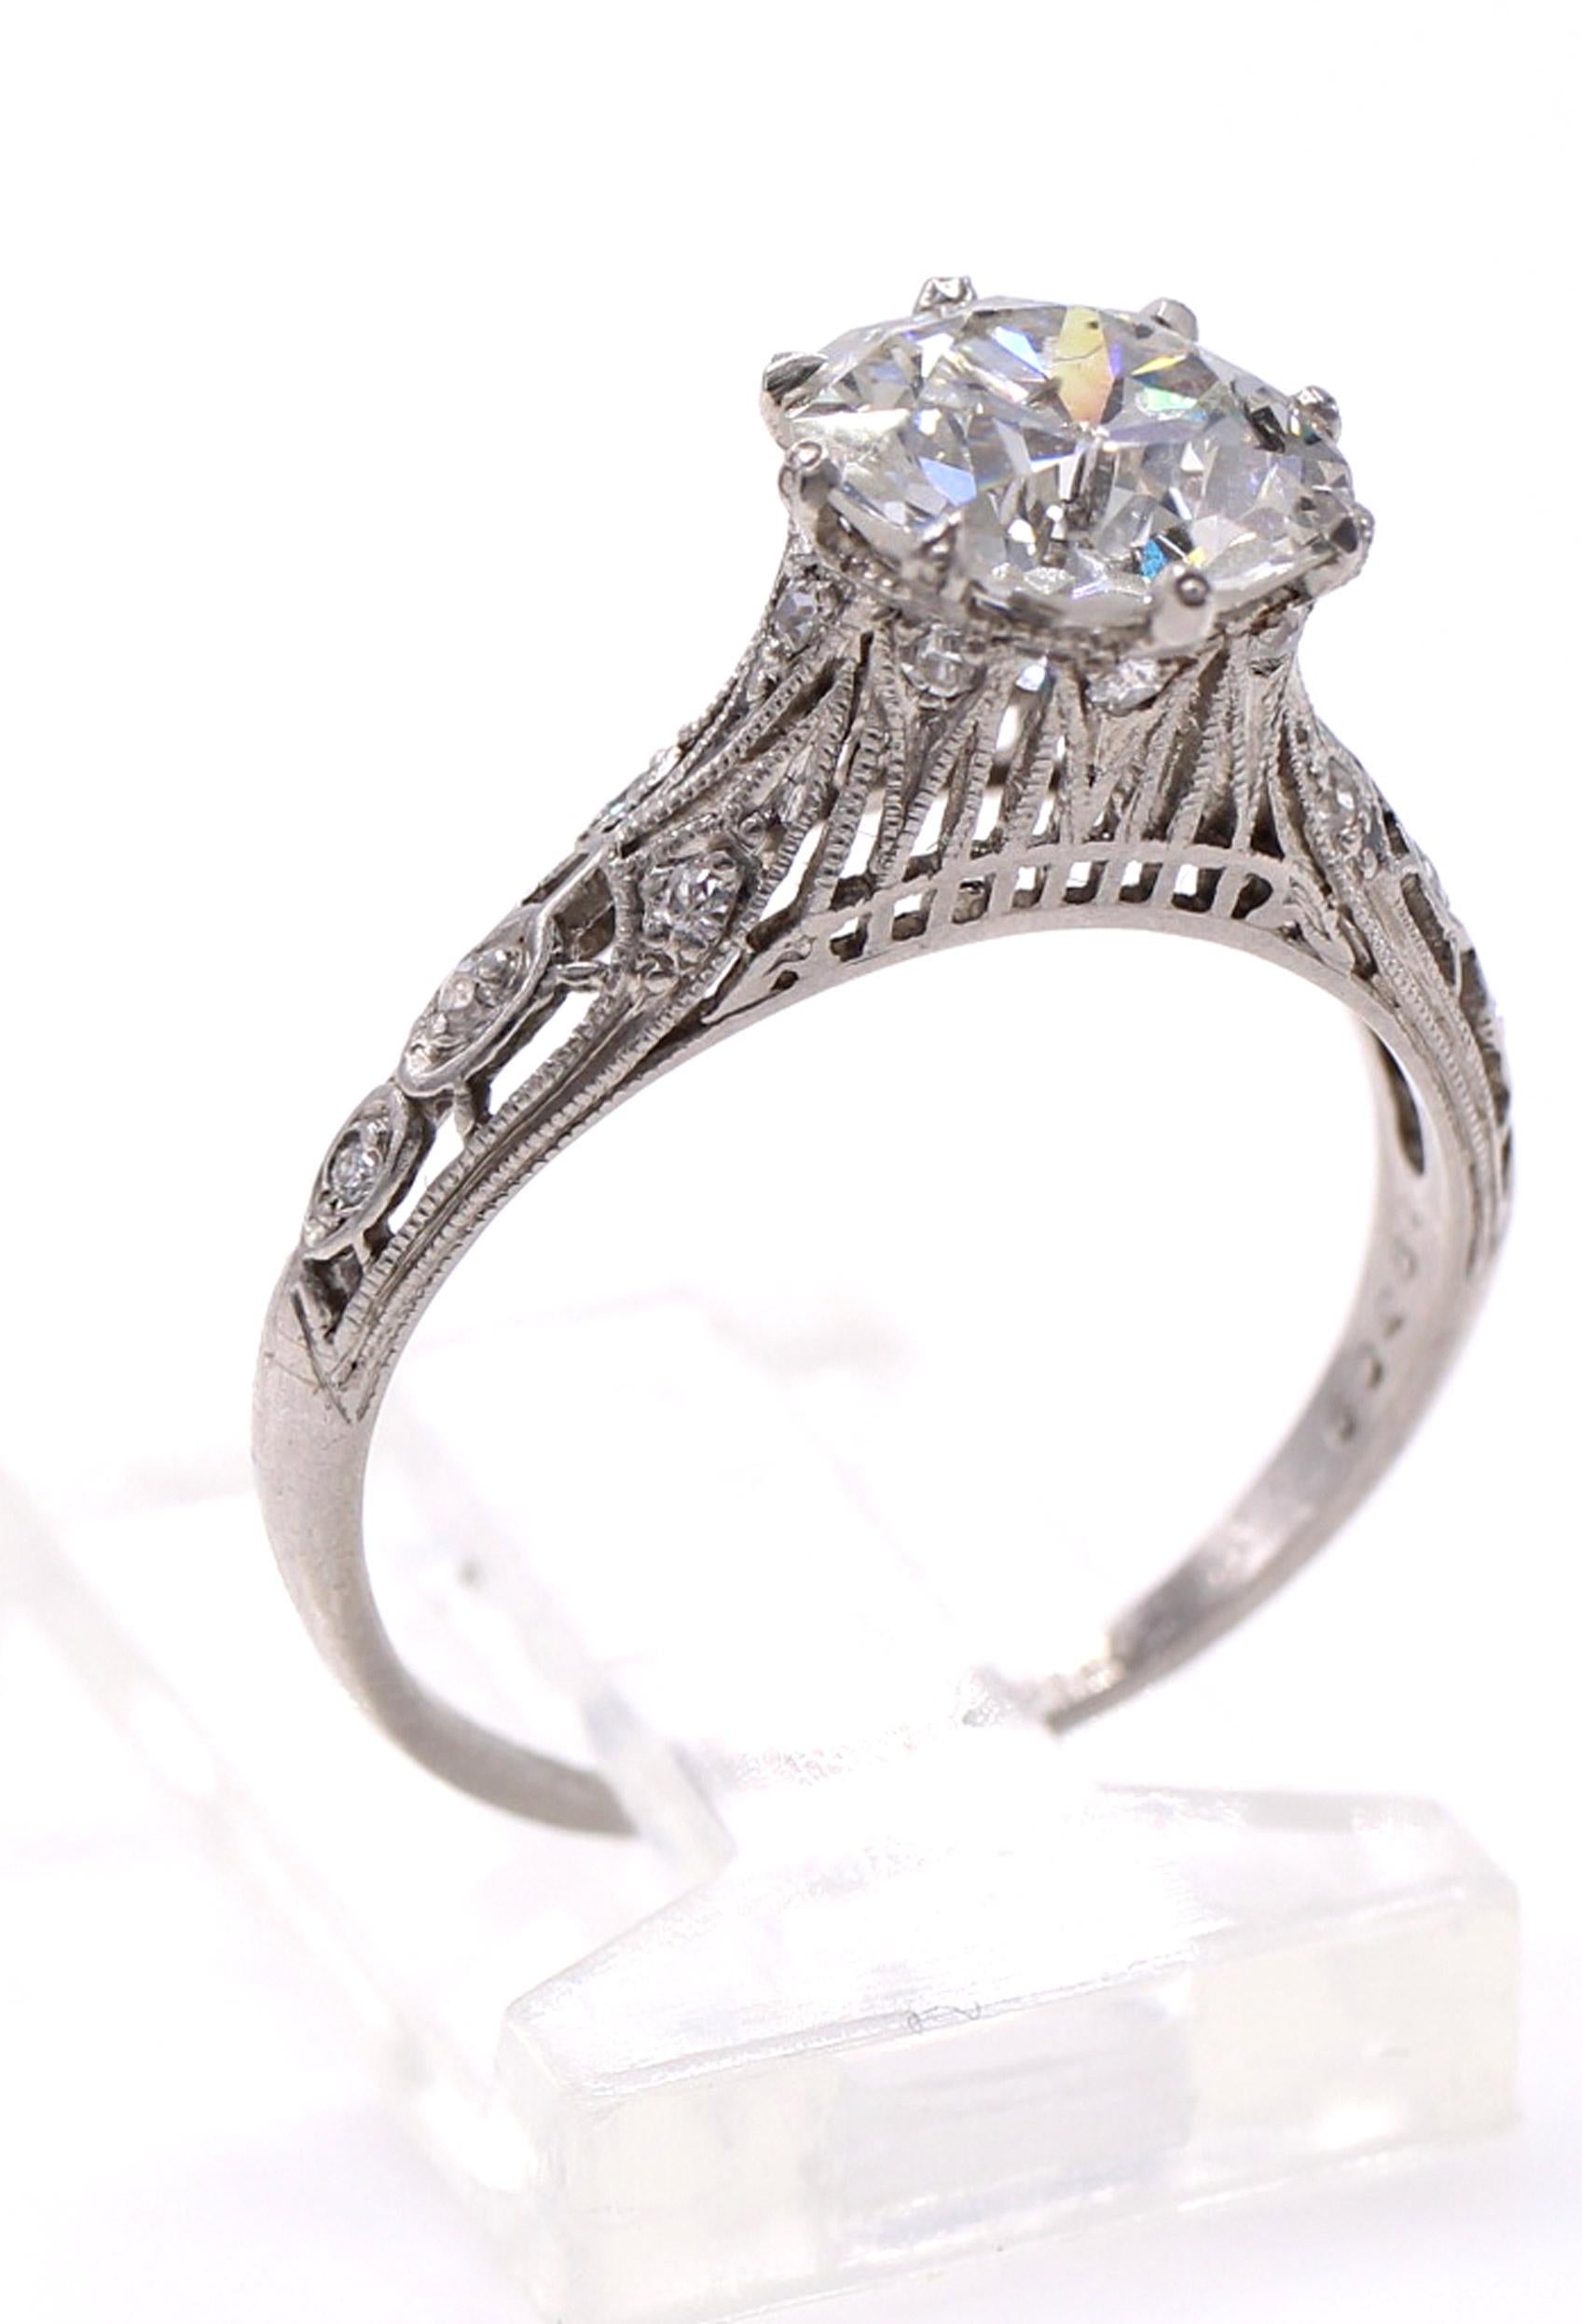 Art Deco Old European Cut Diamond Engagement Ring In Excellent Condition For Sale In New York, NY